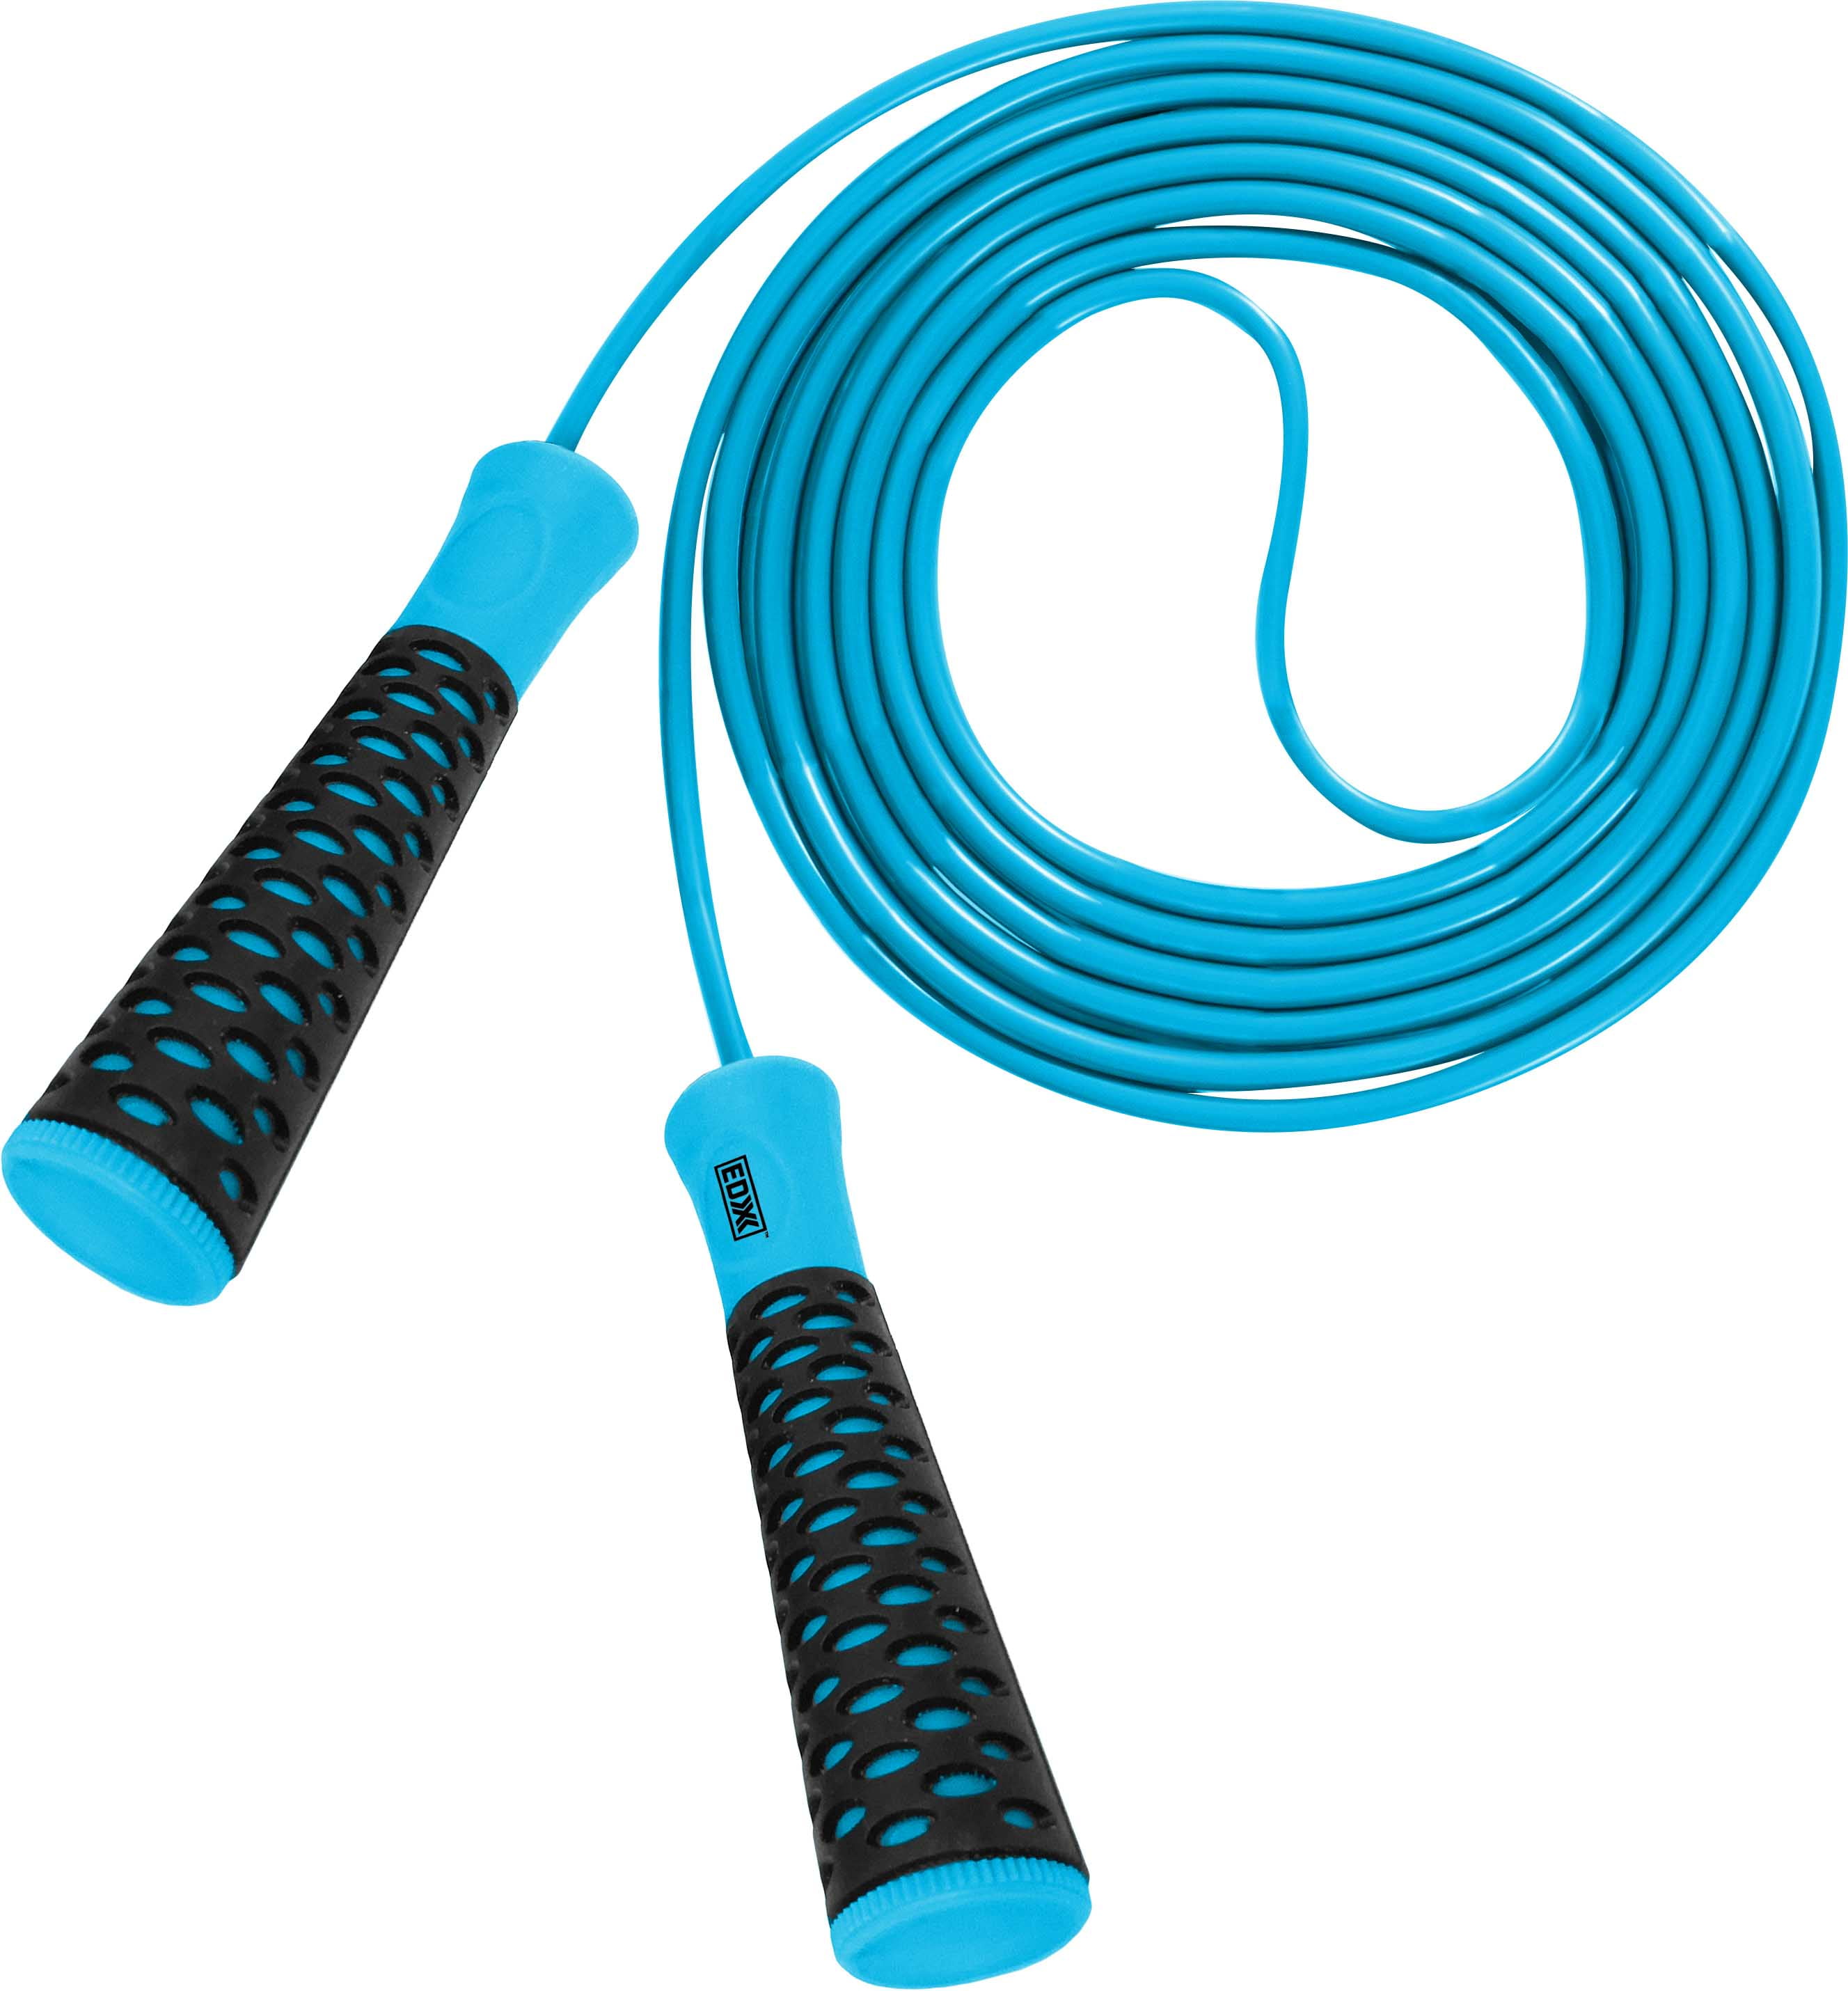 QIFJ Jump Rope 10 Feet Adjustable PVC Jump Rope for Cardio Fitness Versatile Jump Rope for Both Kids and Adults 